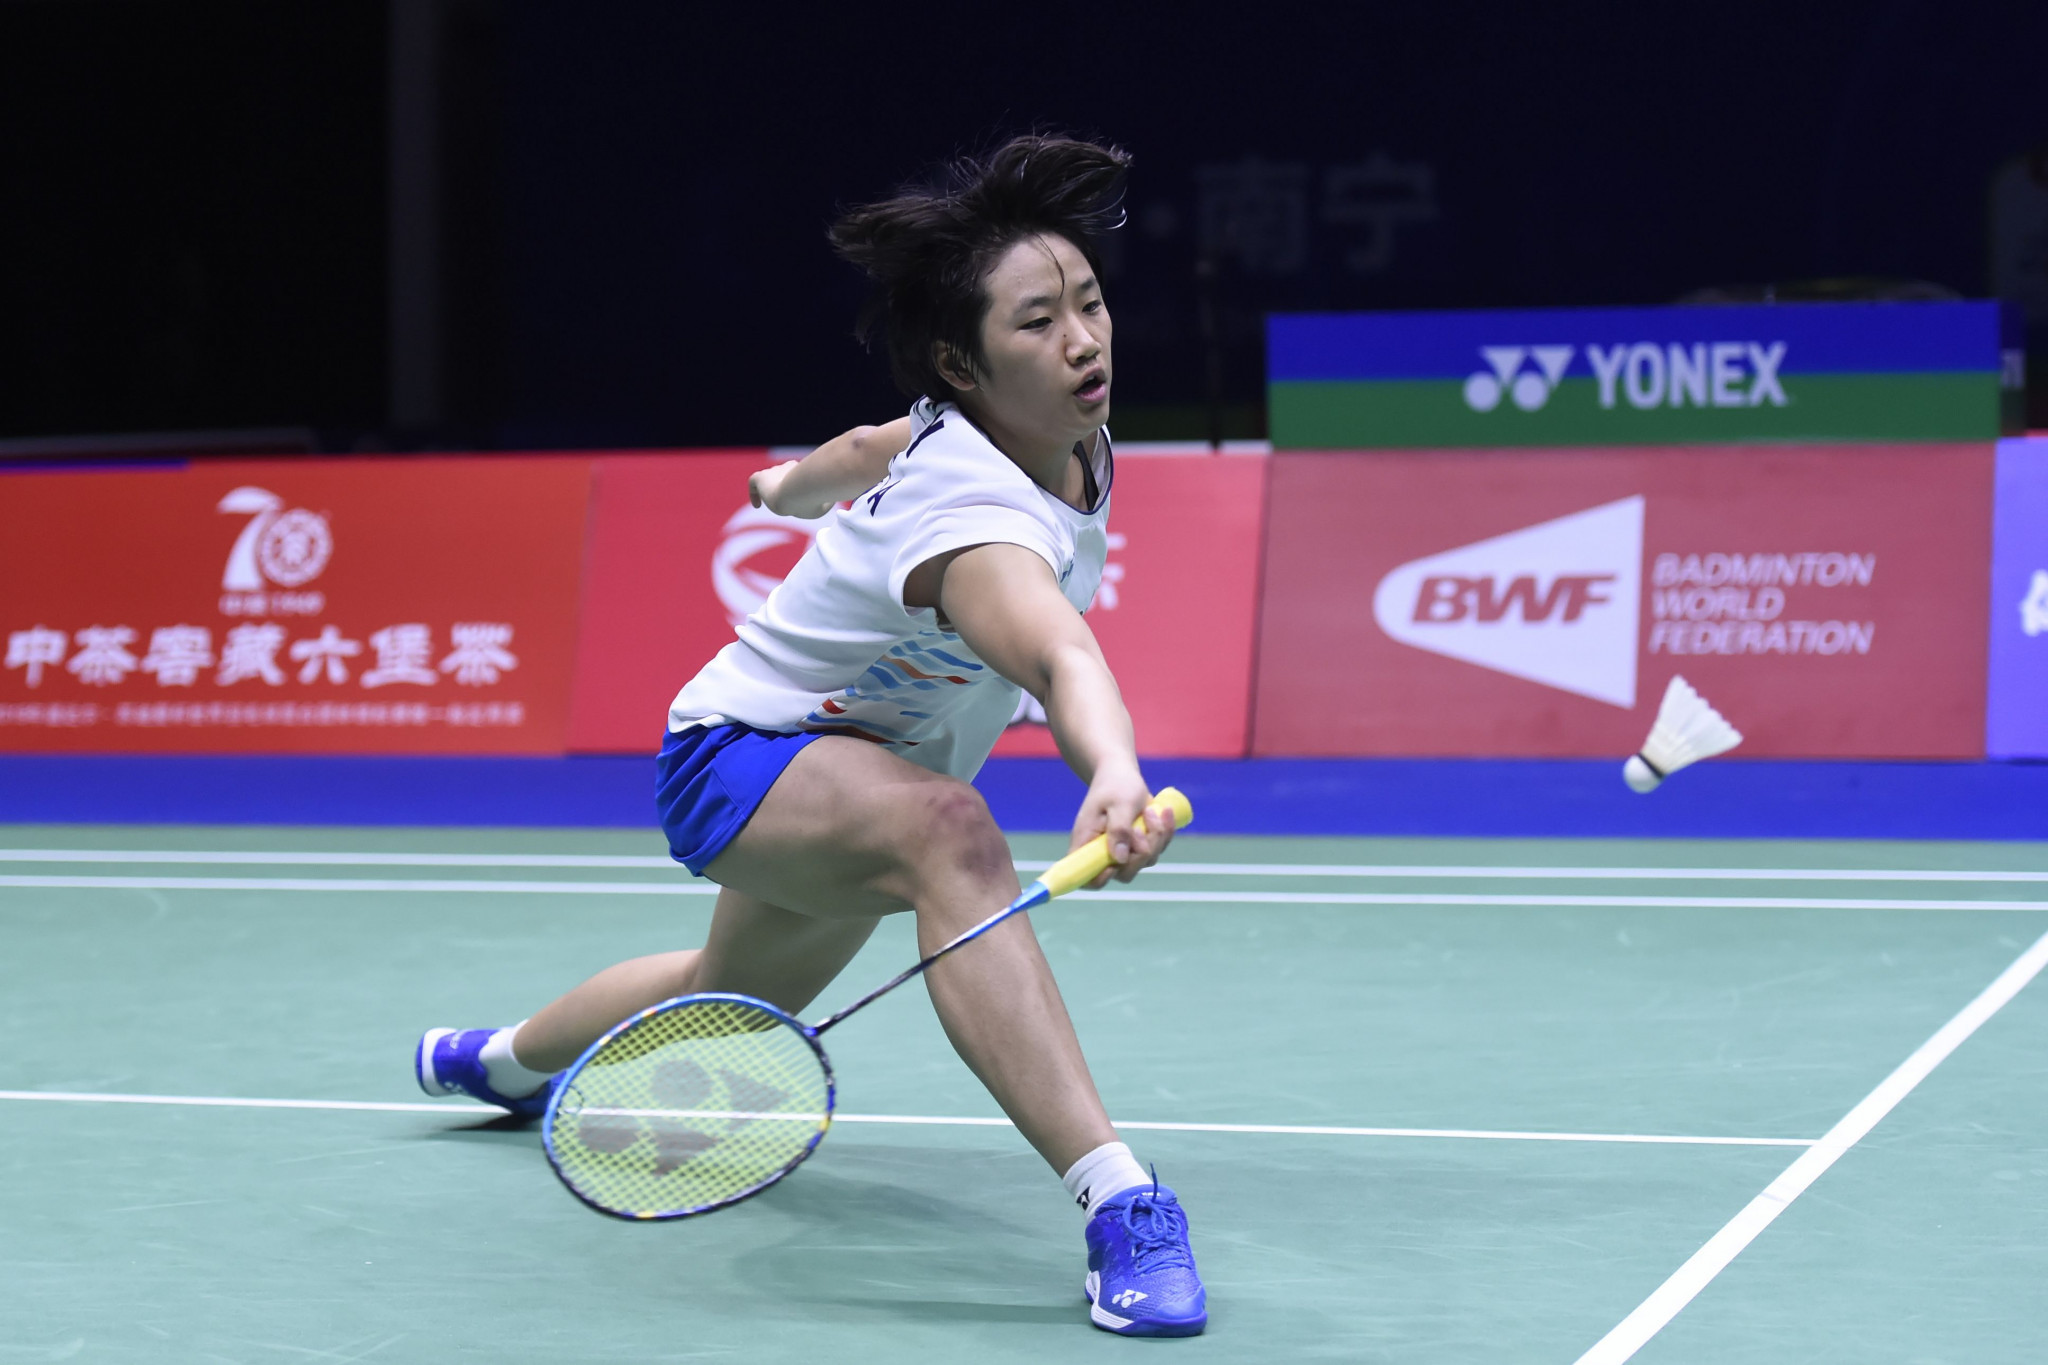 South Korea's An Se-young beat Thailand's top seed Pornpawee Chochuwong in straight sets in the women's singles semi-final ©Getty Images